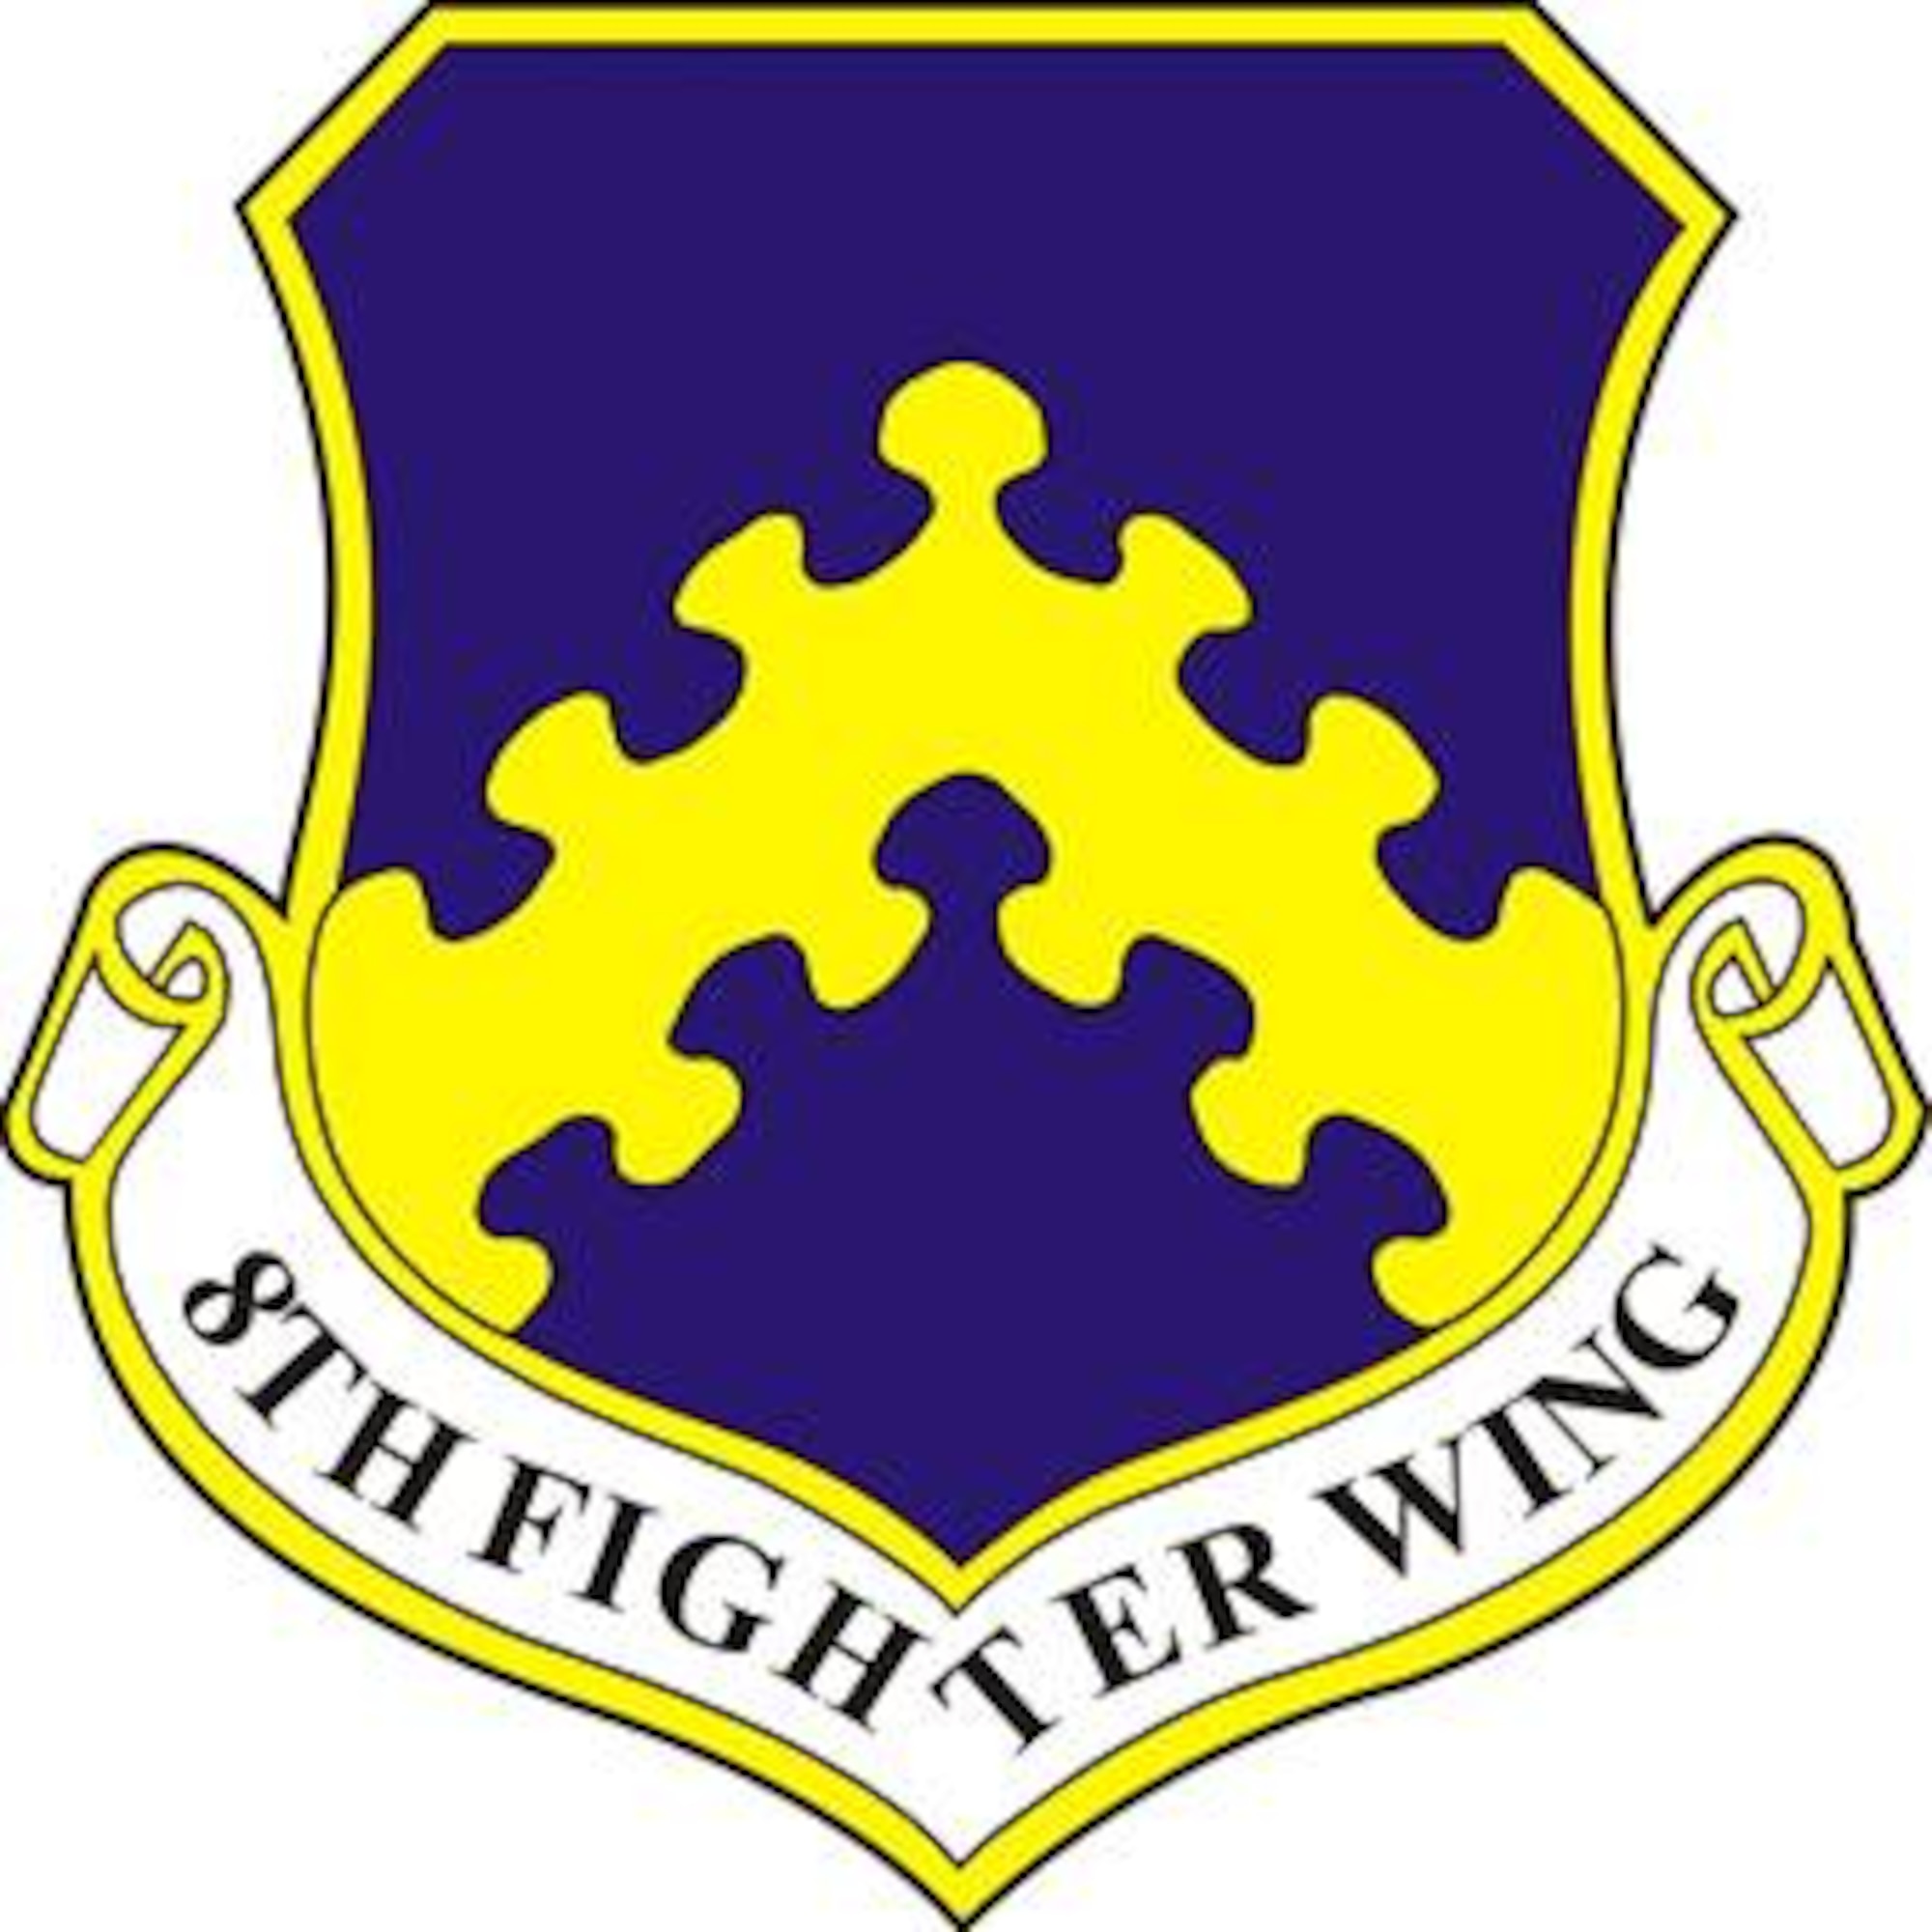 8th Fighter Wing "Wolf Pack".